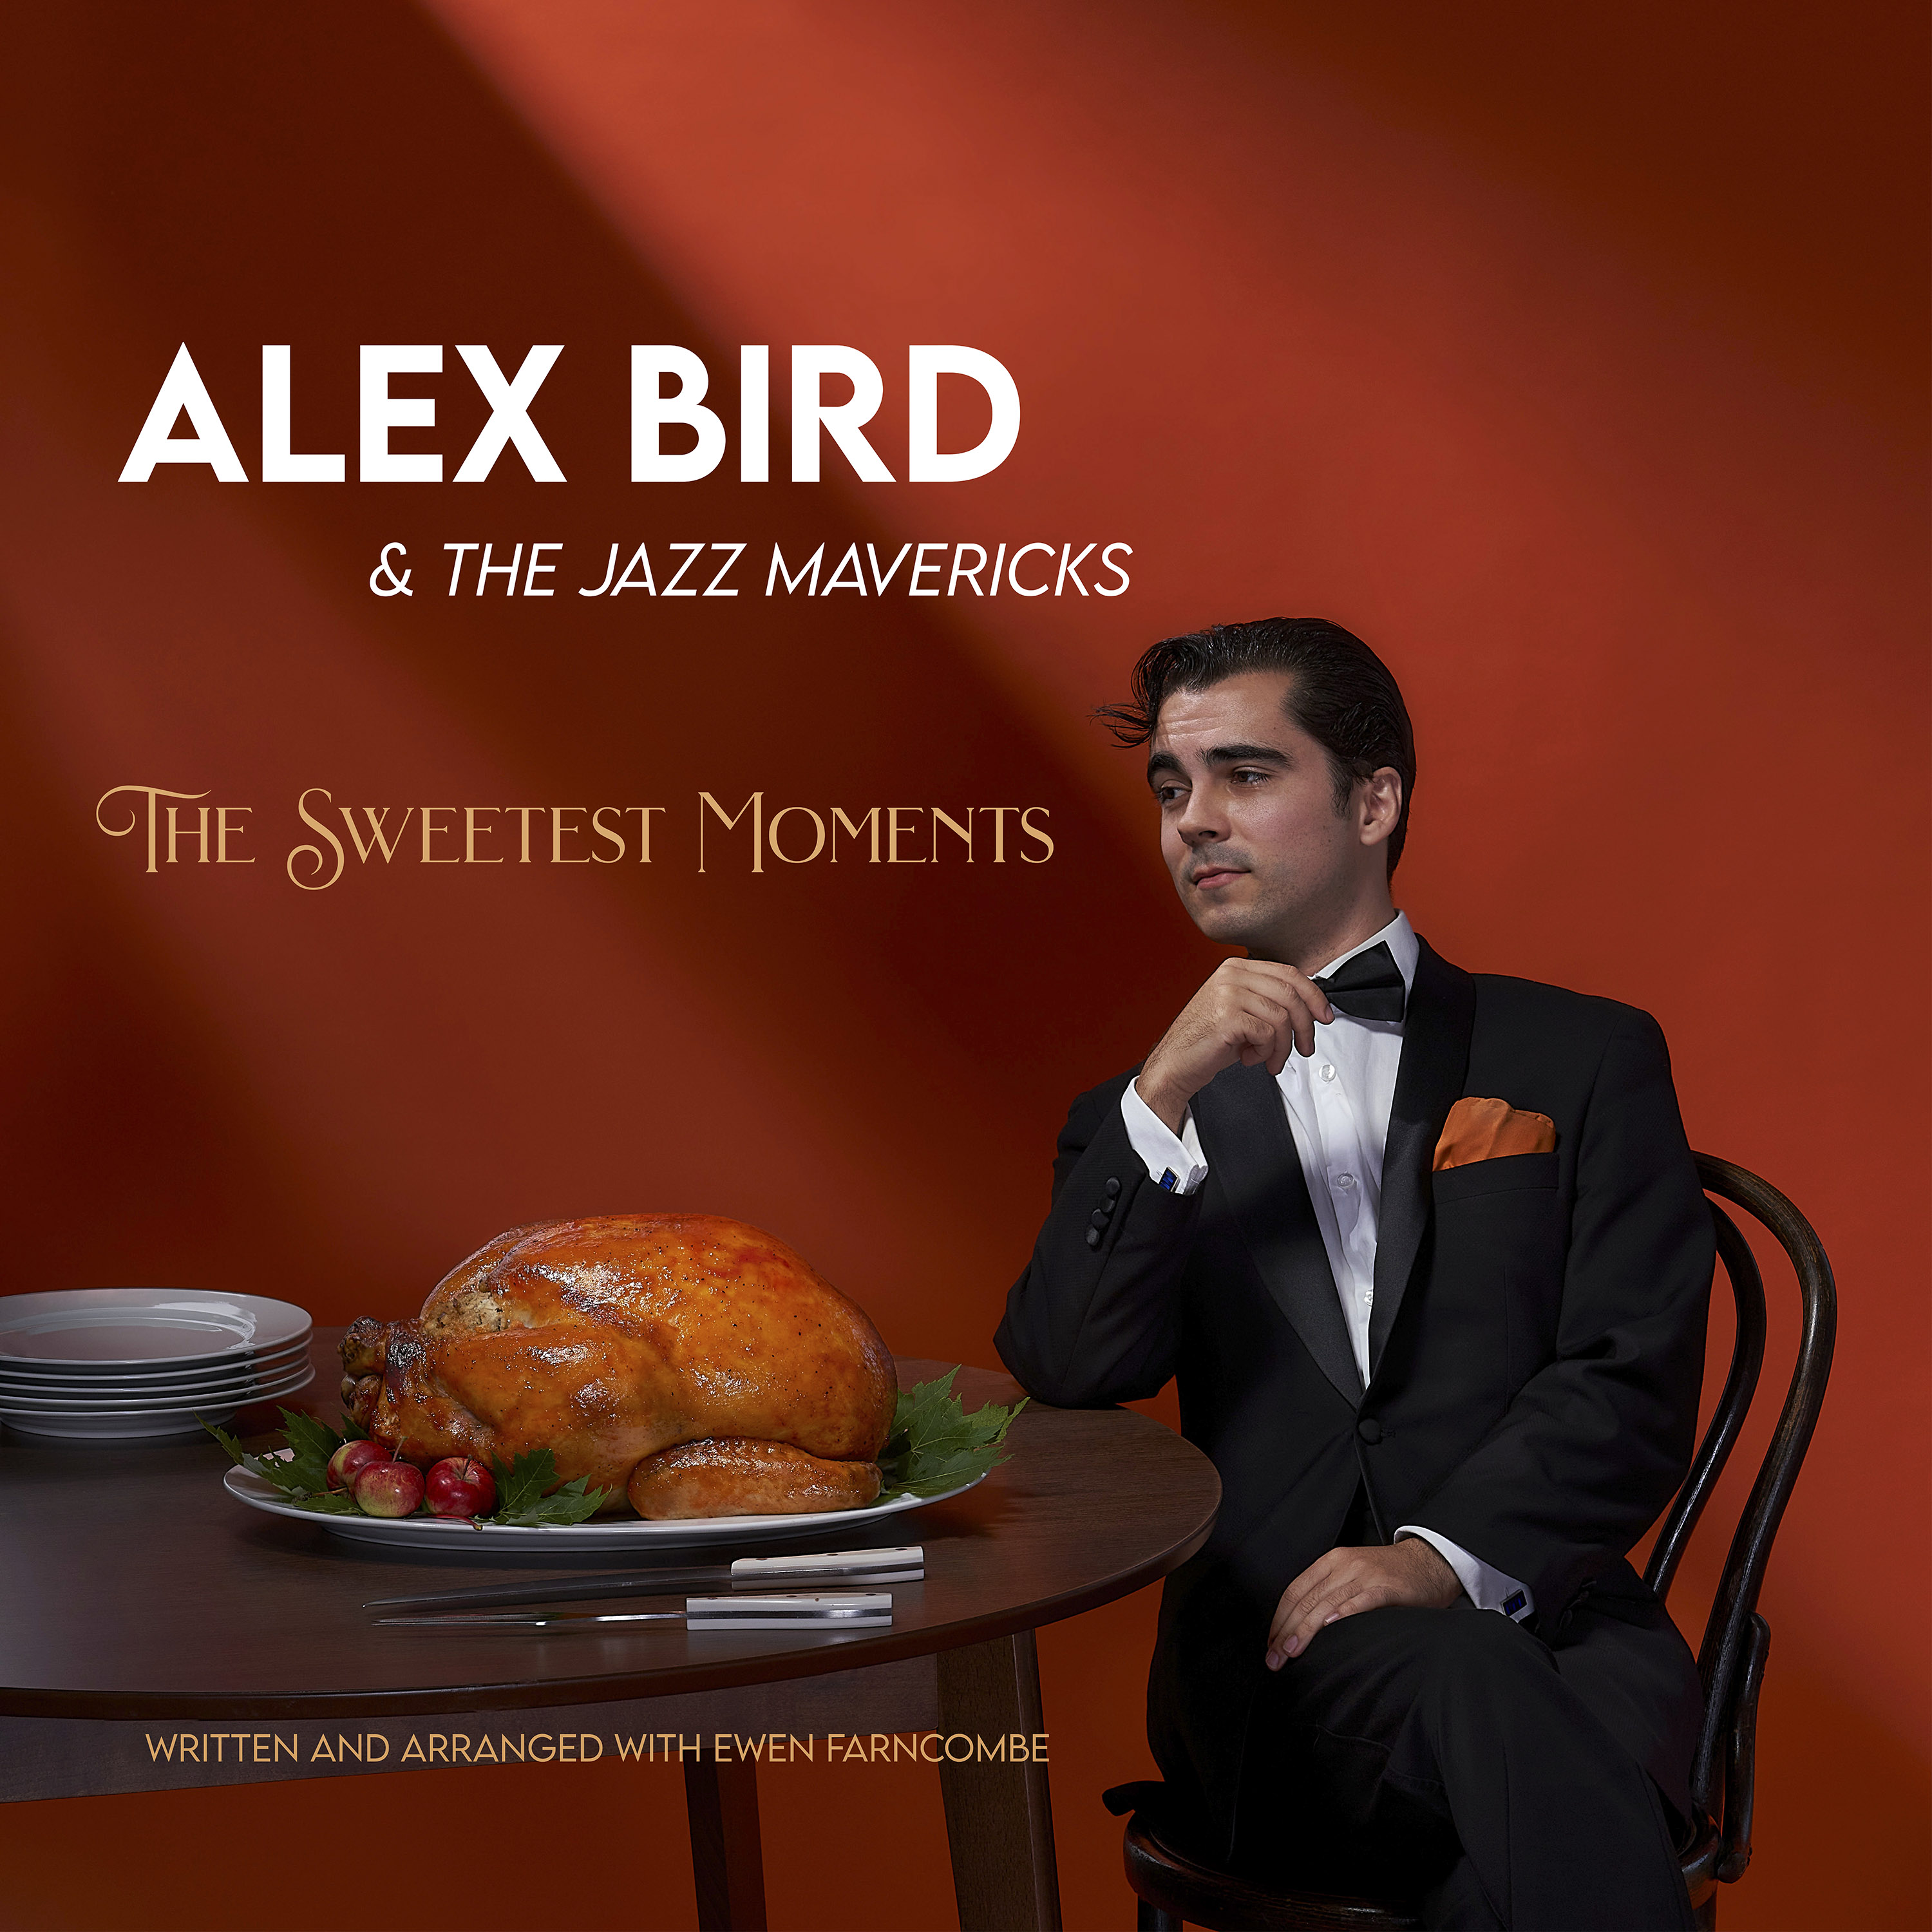 Jazz Singer Alex Bird Swings into the Season with Canada’s First Great Thanksgiving Song 